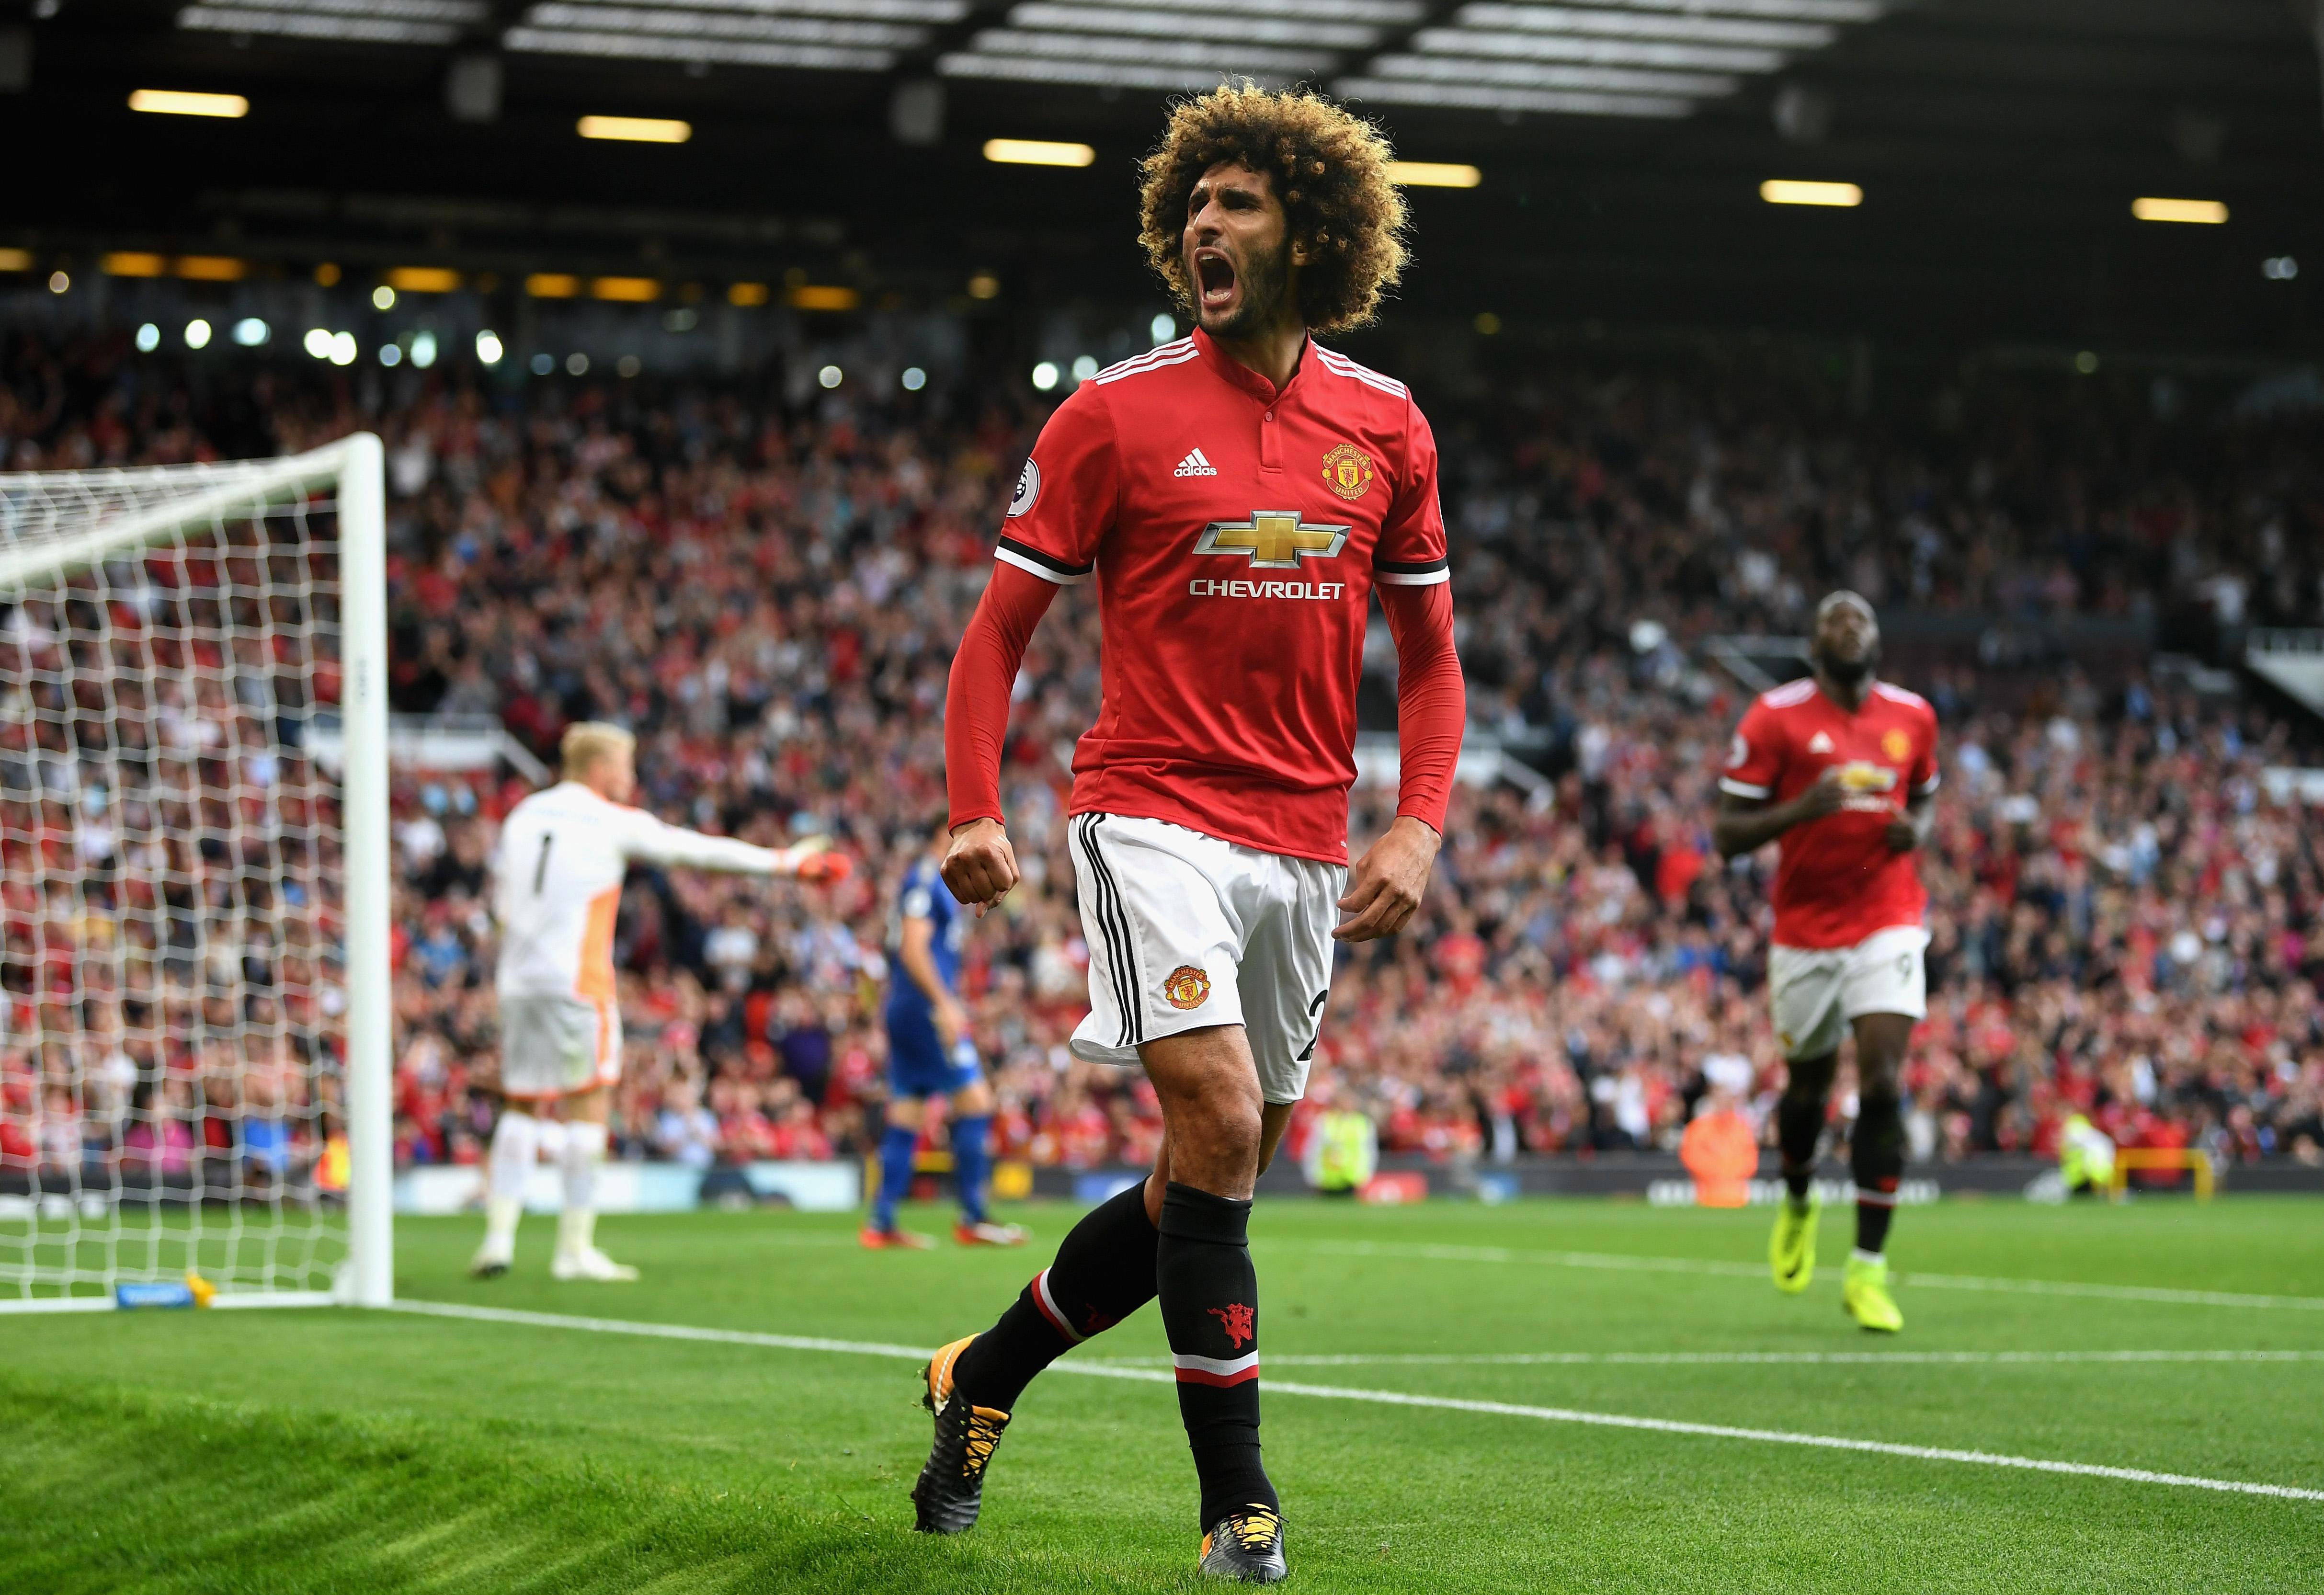 'The worst thing we've done since appointing Moyes' - Man United fans in uproar after hearing about Fellaini's new deal